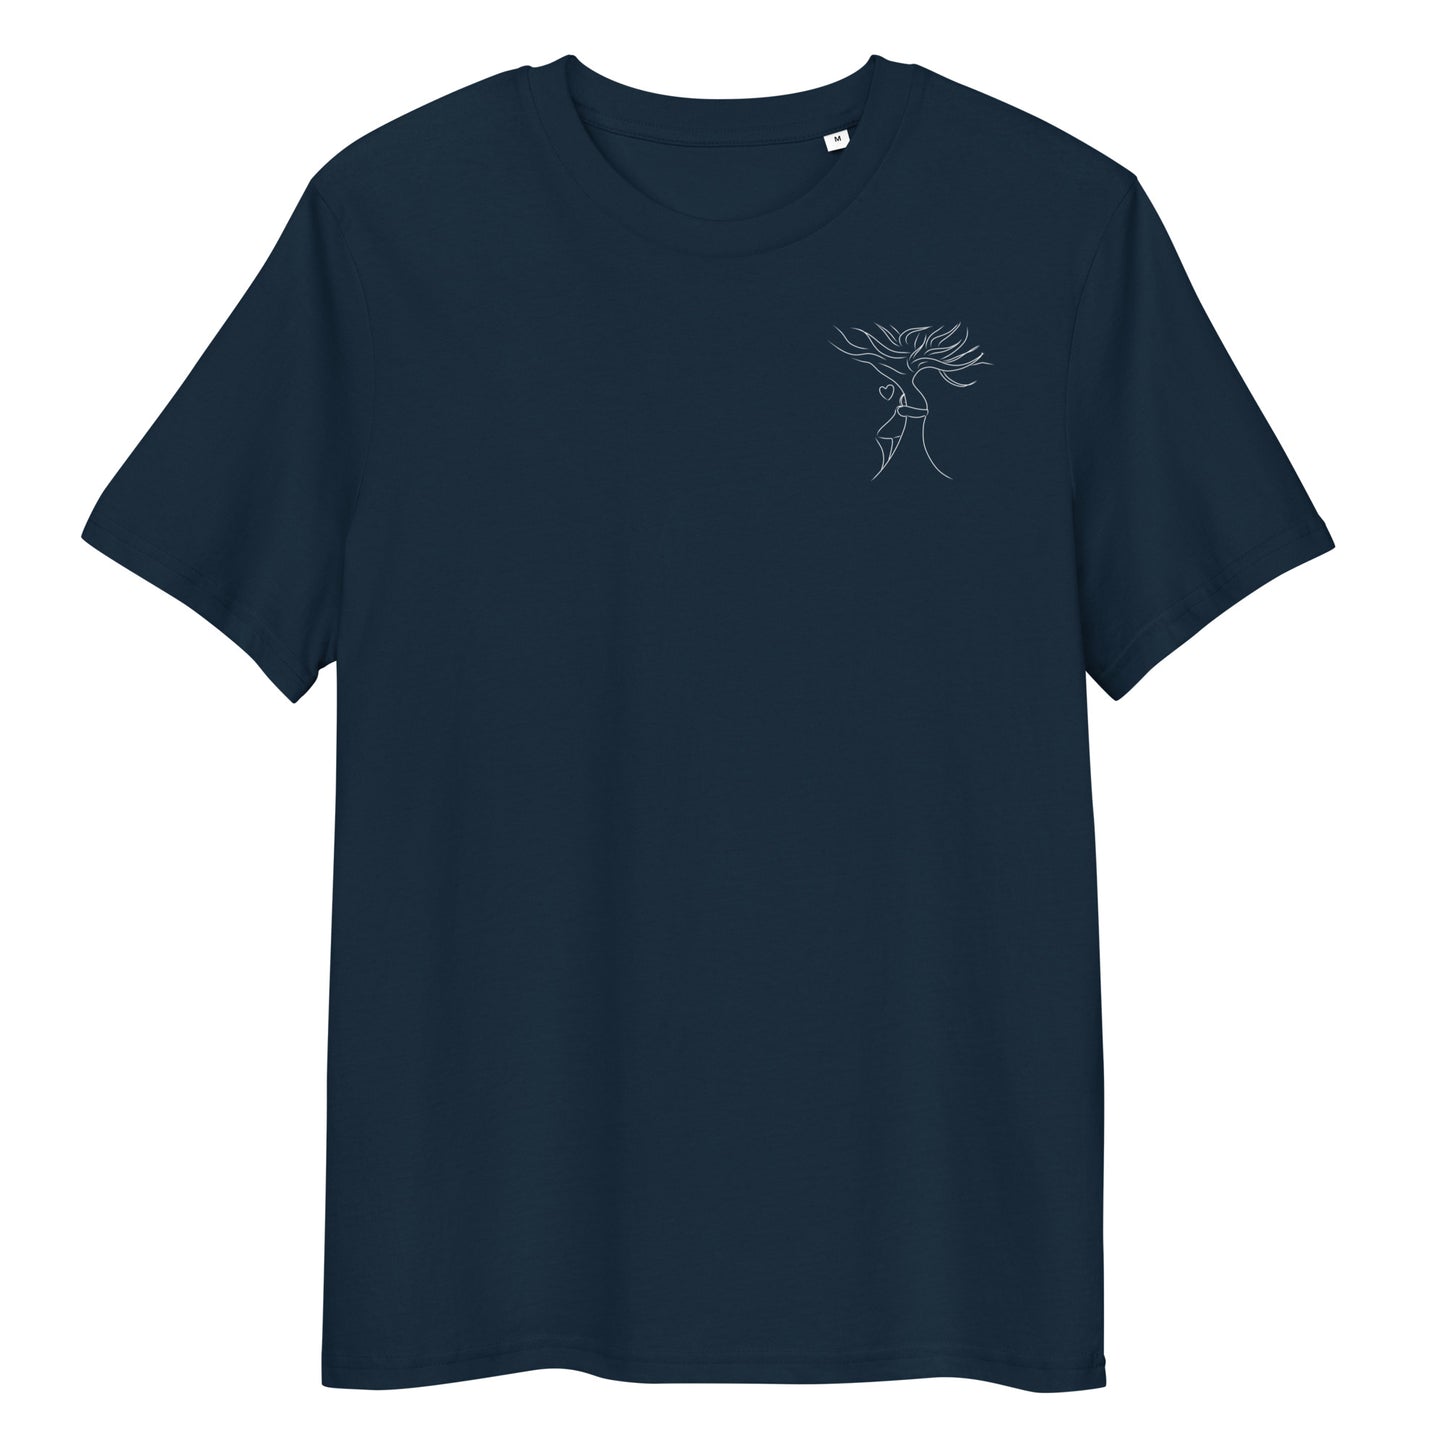 Sustainable Embrace White Tree | 100% Organic Cotton T Shirt in navy